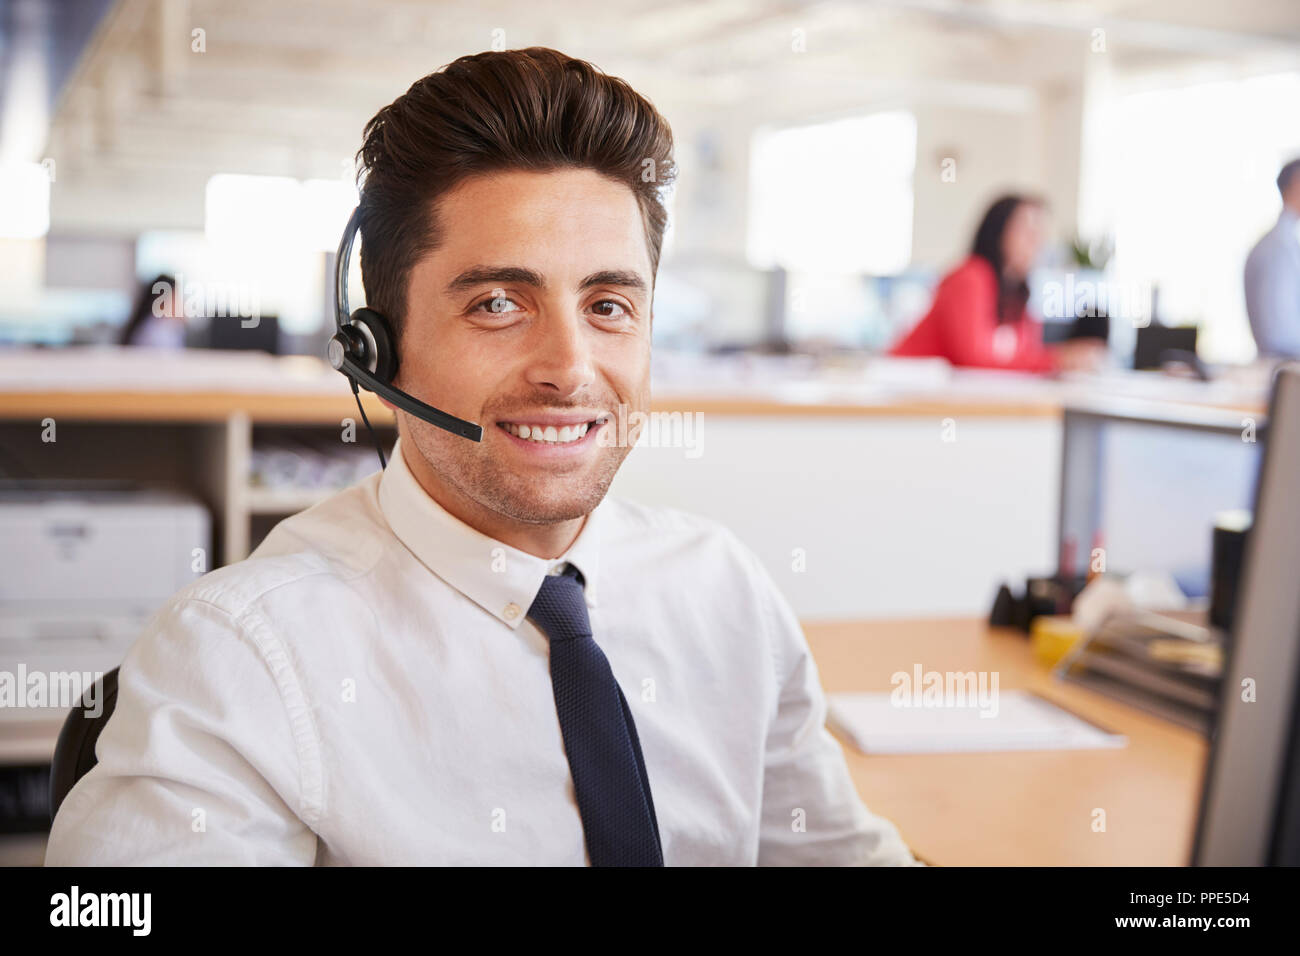 Hispanic male call center worker smiling to camera, close-up Banque D'Images